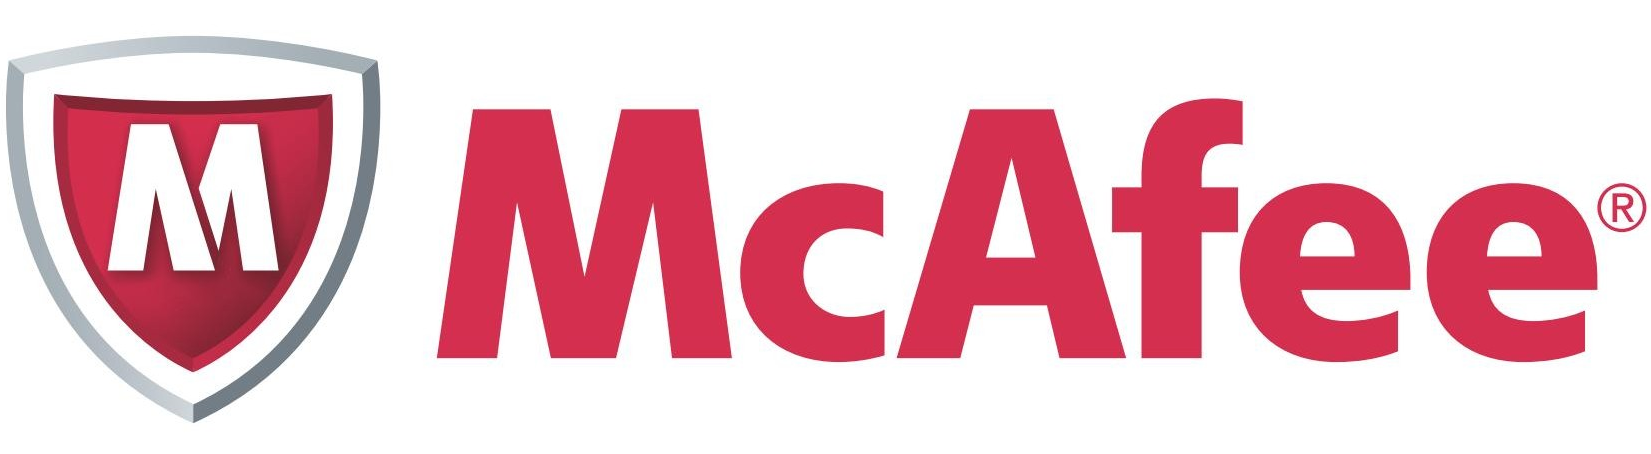 McAfee Gold Business Support - 1 Year - Service